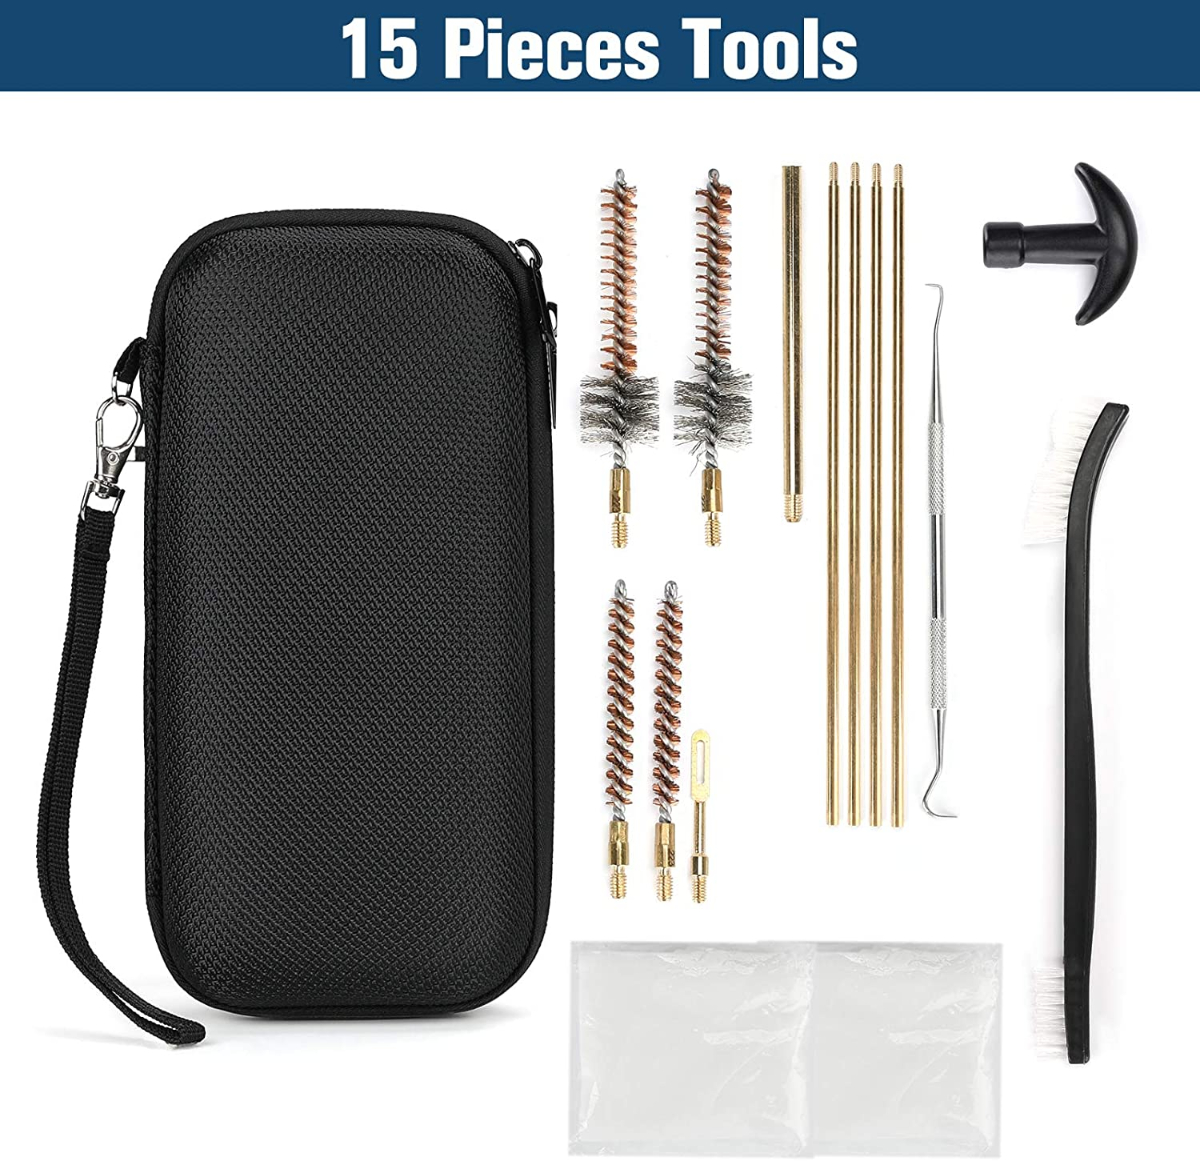 Procase Gun Cleaning Kit For 223556 Rifle 556mm Nato 17128874